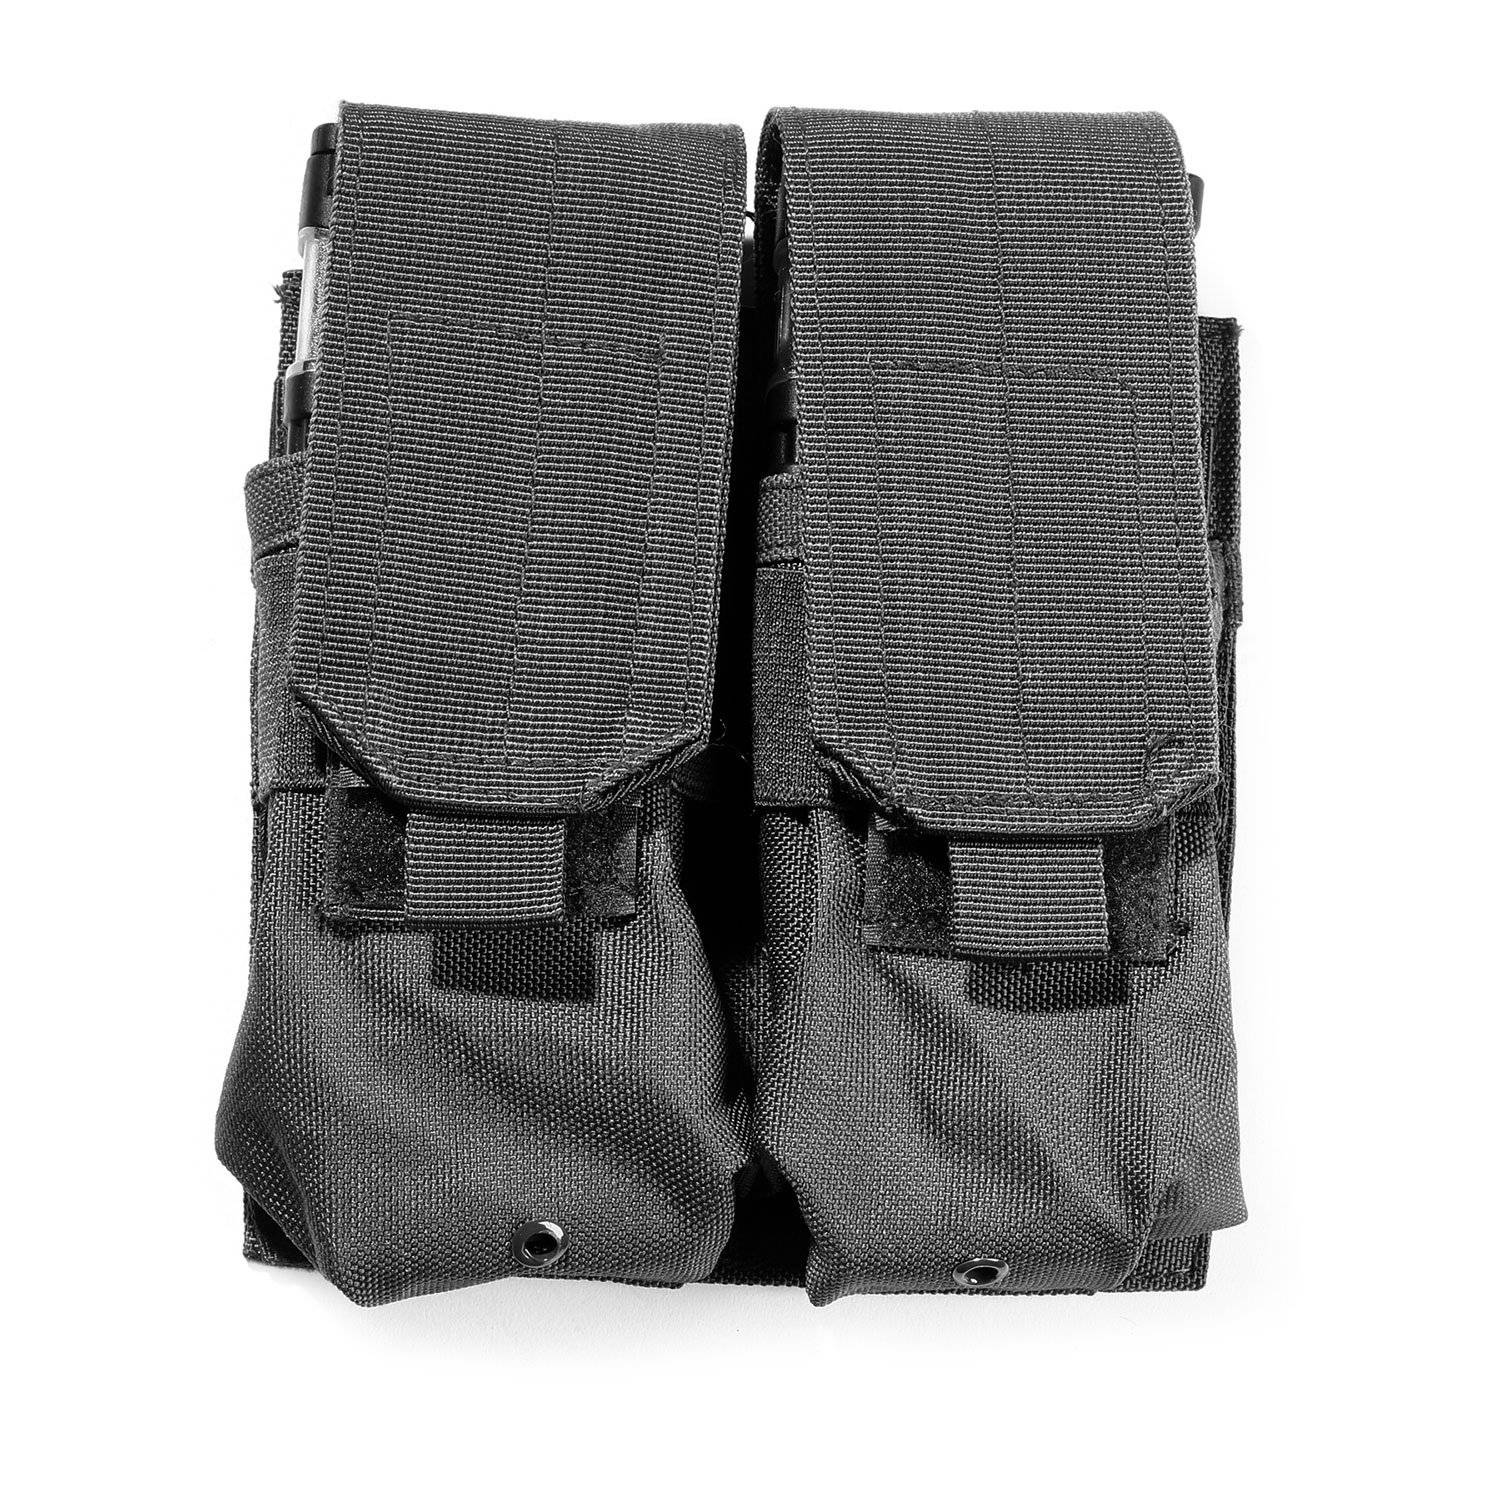 5IVE STAR GEAR ARDP-5S M4/M16 DOUBLE MAG POUCH